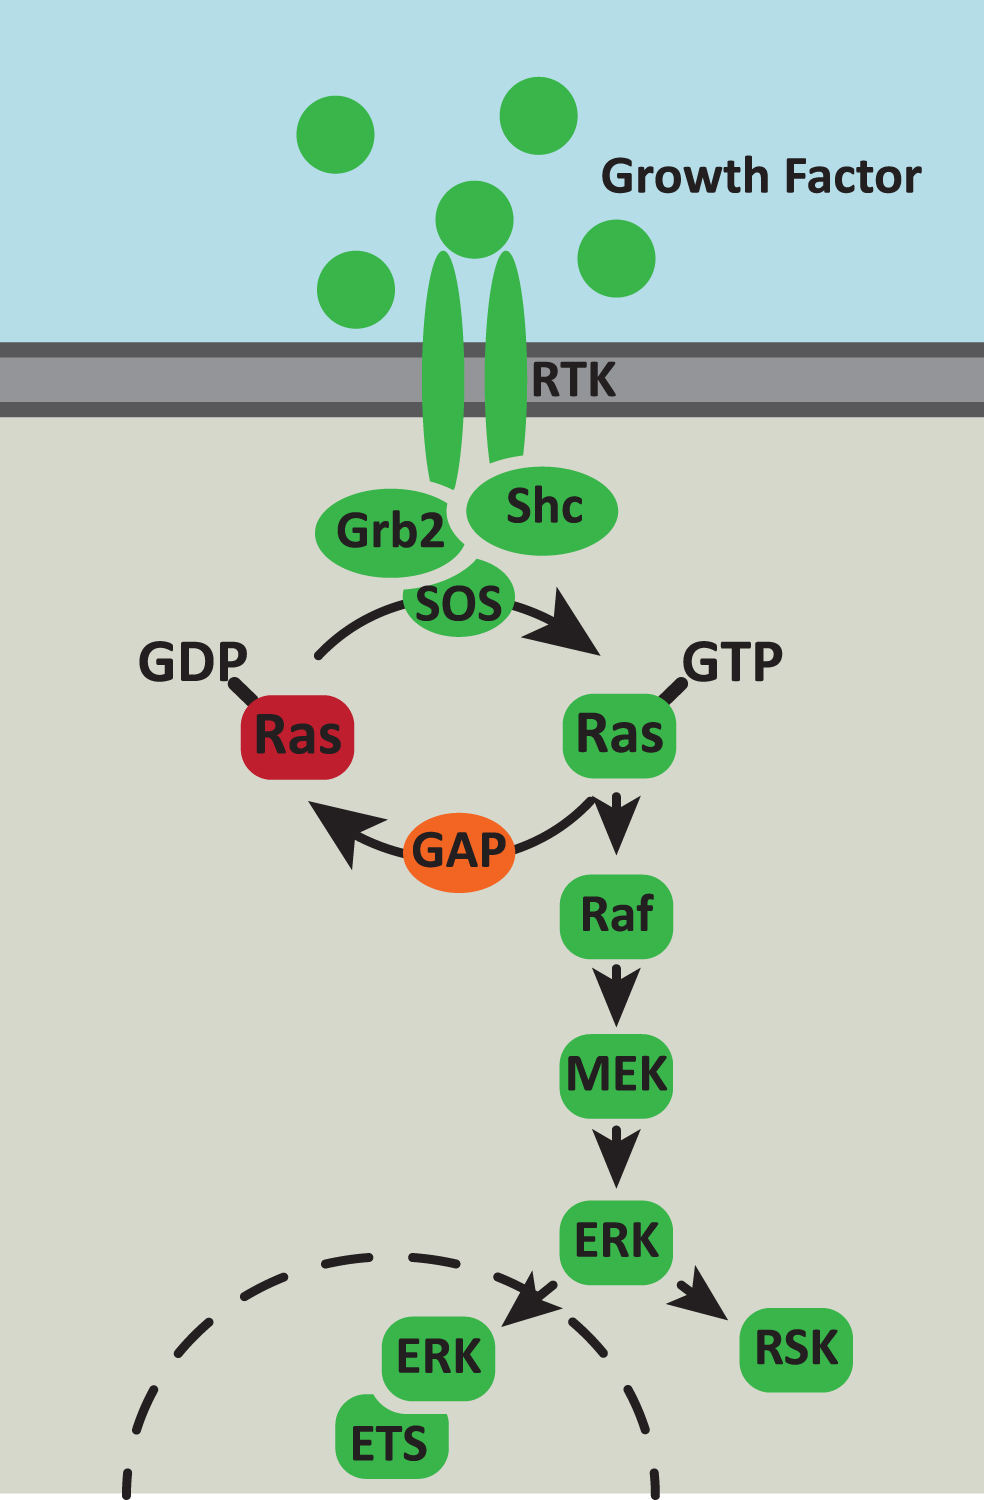 The Ras/MAPK signaling pathway. The Ras/MAPK signaling pathway responds to extracellular cues to control cell survival, proliferation and metabolism. Growth factor binding to receptor tyrosine kinases (RTK) activates autophosphorylation of the receptor which generates binding sites for the Grb2 and Shc adaptor proteins. These adaptor proteins recruit the Ras GTPase exchange factor (GEF), SOS, to the inner surface of the membrane. SOS catalyses the exchange of GDP to GTP on Ras and then the activated Ras-GTP recruits Raf to the complex. Raf then initiates a downstream phosphorylation cascade via MEK and ERK. Activated ERK phosphorylates multiple cytoplasmic and cytoskeletal proteins including ribosomal S6 kinase (RSK). In addition, activated ERK can translocate to the nucleus, where it phosphorylates and activates members of the the E-twenty-six (ETS) transcription factor family.